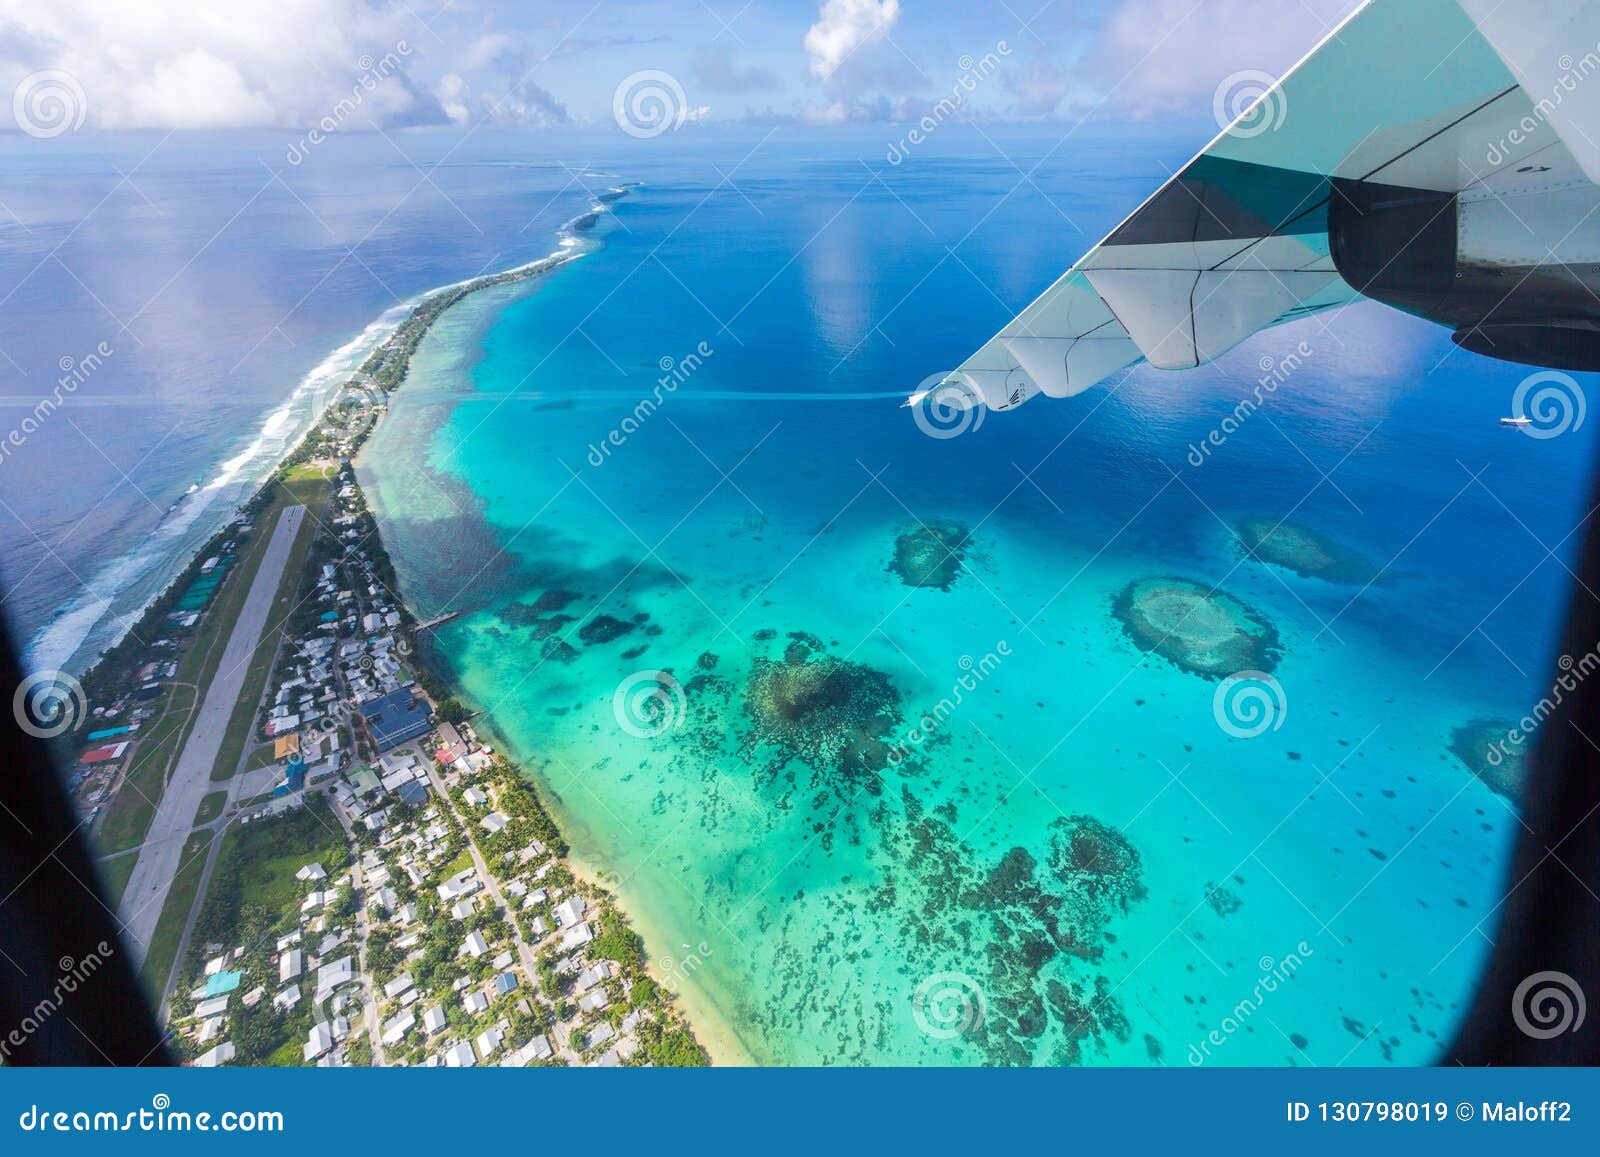 tuvalu island azure turquoise blue lagoon under the wing of an airplane, aerial view. polynesia, oceania.